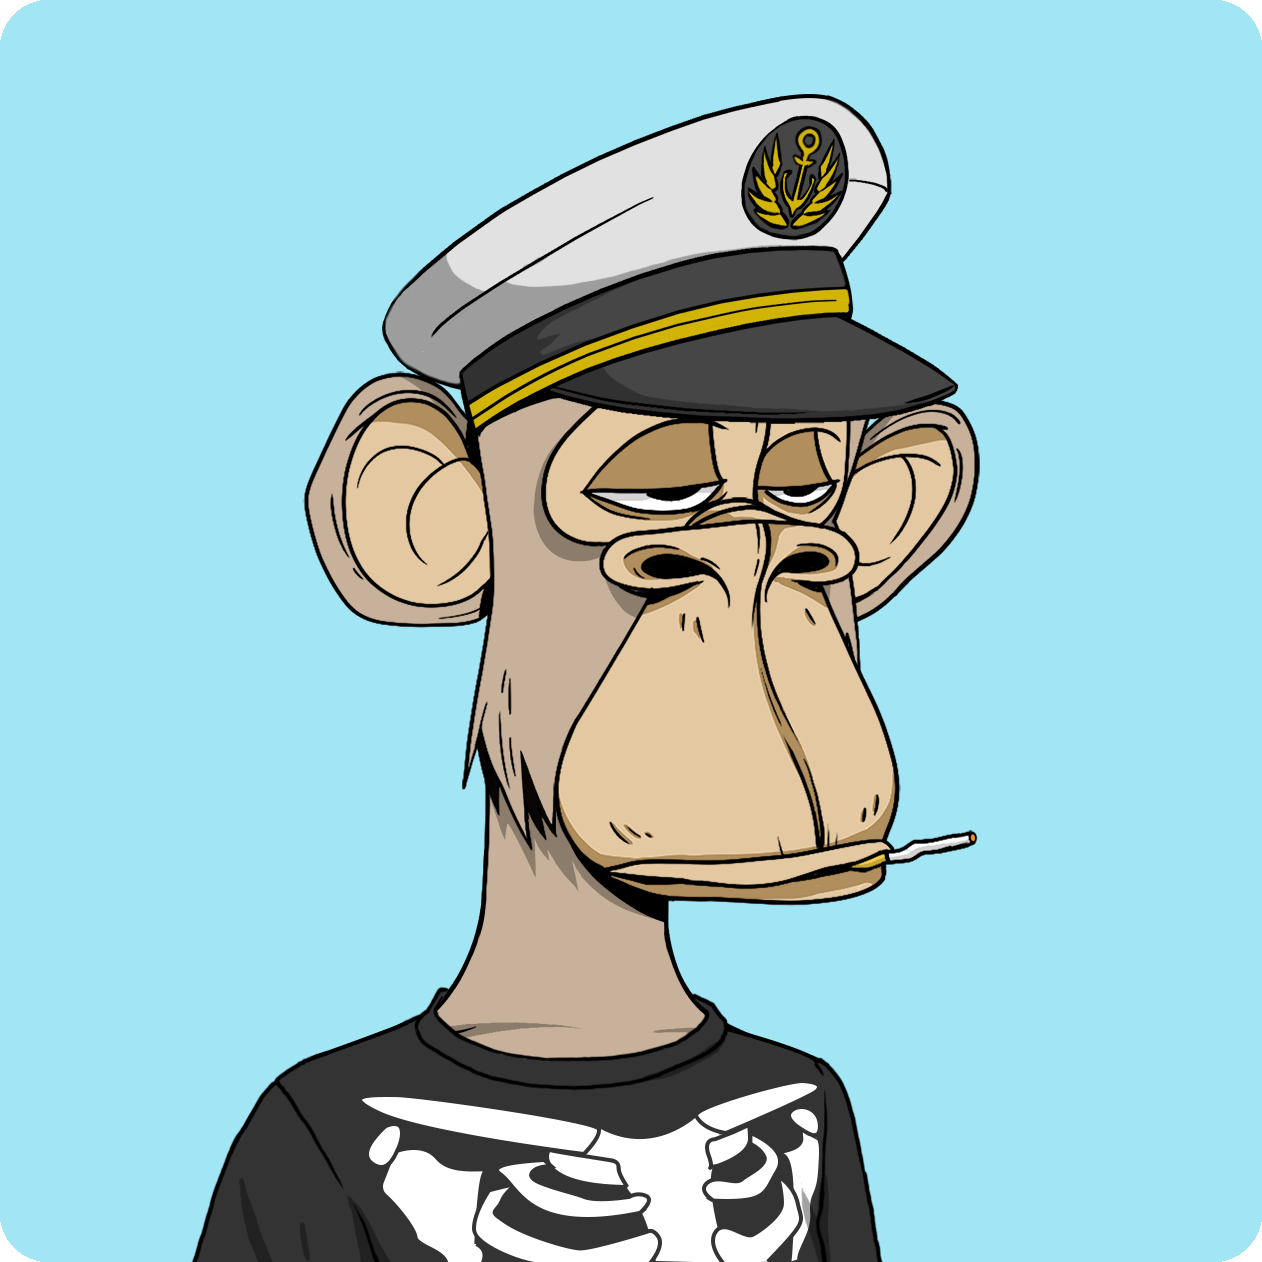 Any other Phoebe fans members of the Bored Ape Yacht Club? I snagged one with the skeleton shirt. No idea if the devs are fans though, could be coincidental!